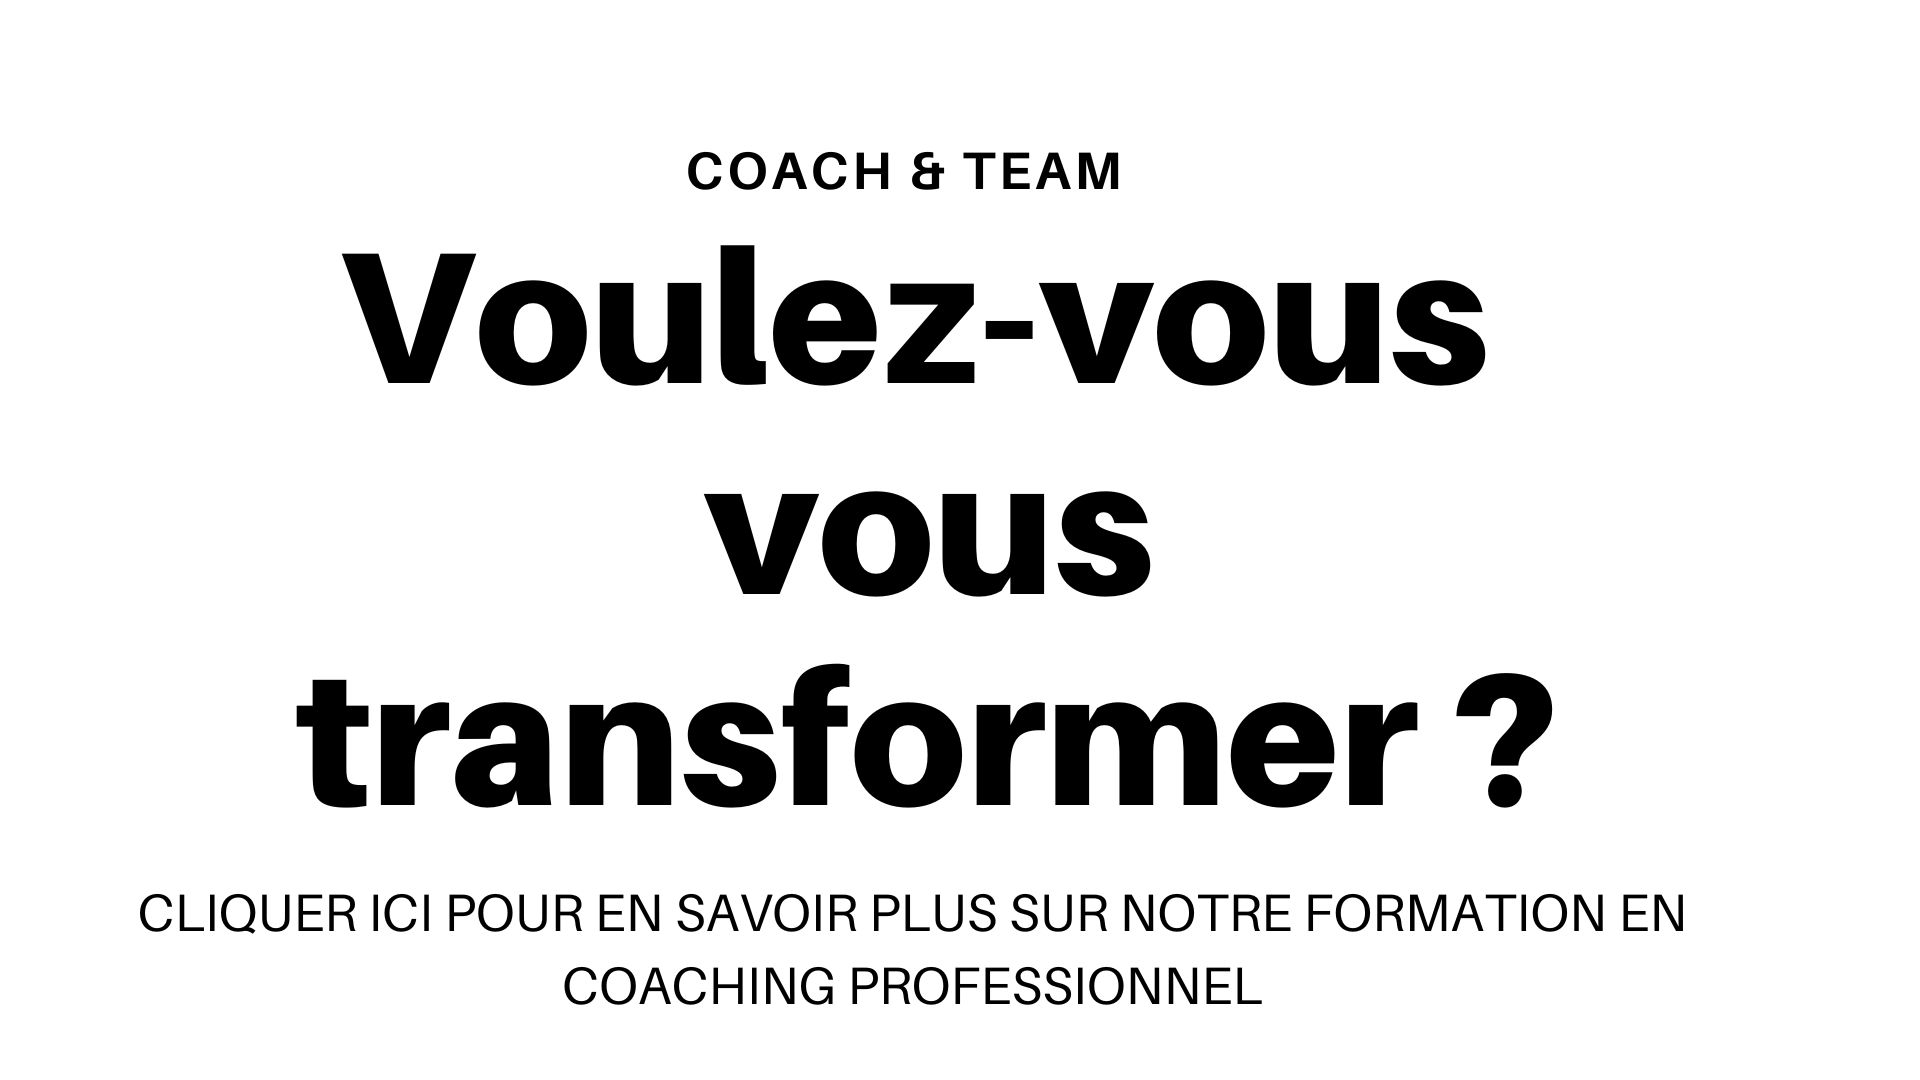 Formation Coaching professionnel Coach & Team